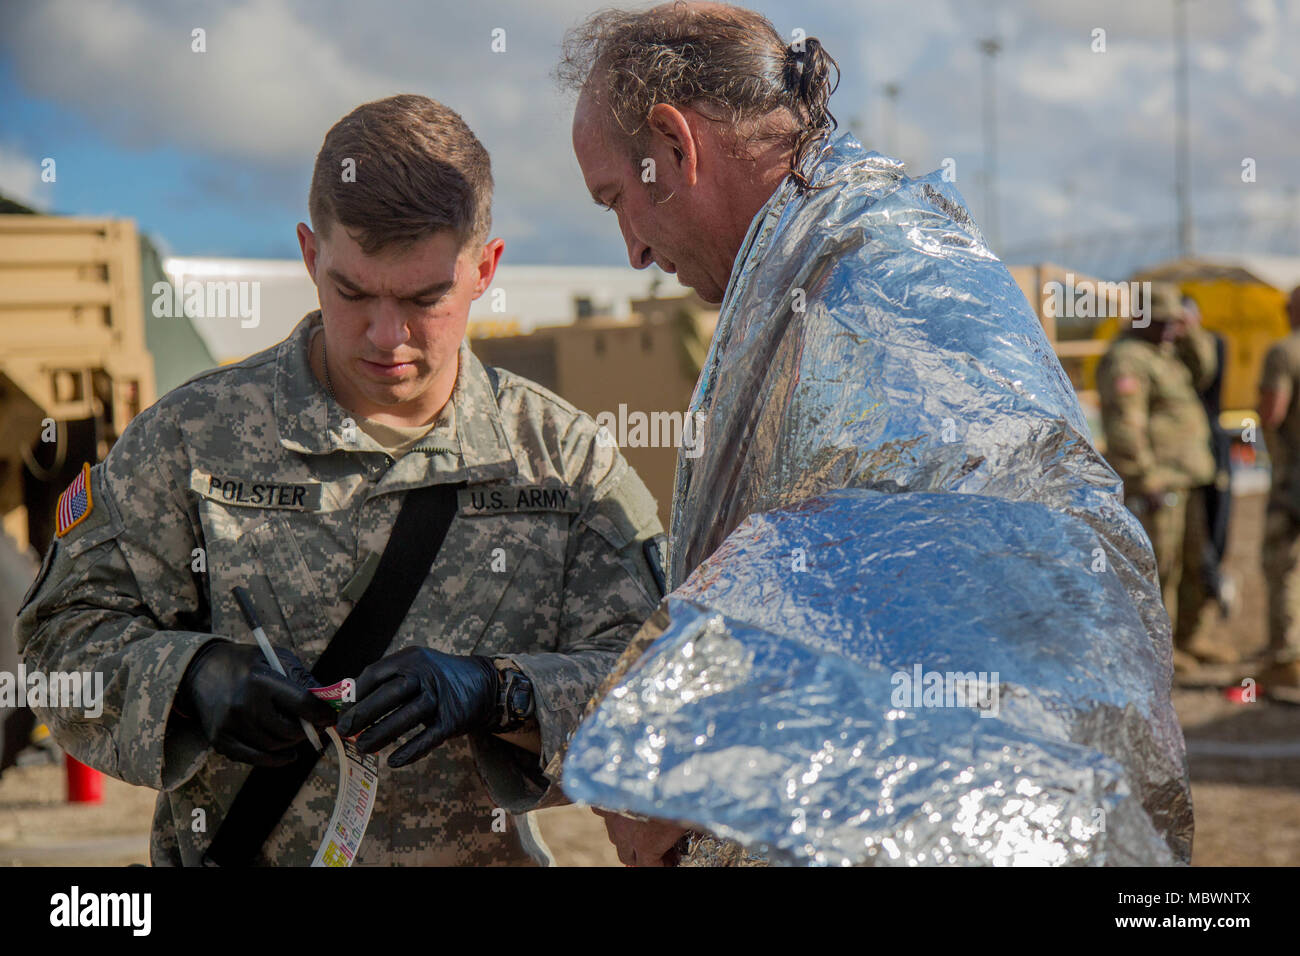 U.S. Army Sgt. Austin Polster of the 409th Area Support Medical Company, triage a casualty for a simulated mass chemical attack during a Joint Training Exercise hosted by the Miami-Dade Fire Department and Homestead-Miami Speedway in Miami, Fla. Jan. 11, 2018. This JTE focused on building response capabilities and seamless the transition between the local first responders and the follow-on support provided by the National Guard and Active duty soldiers. (U. S. Army Photo by Spc. P.J. Siquig) Stock Photo